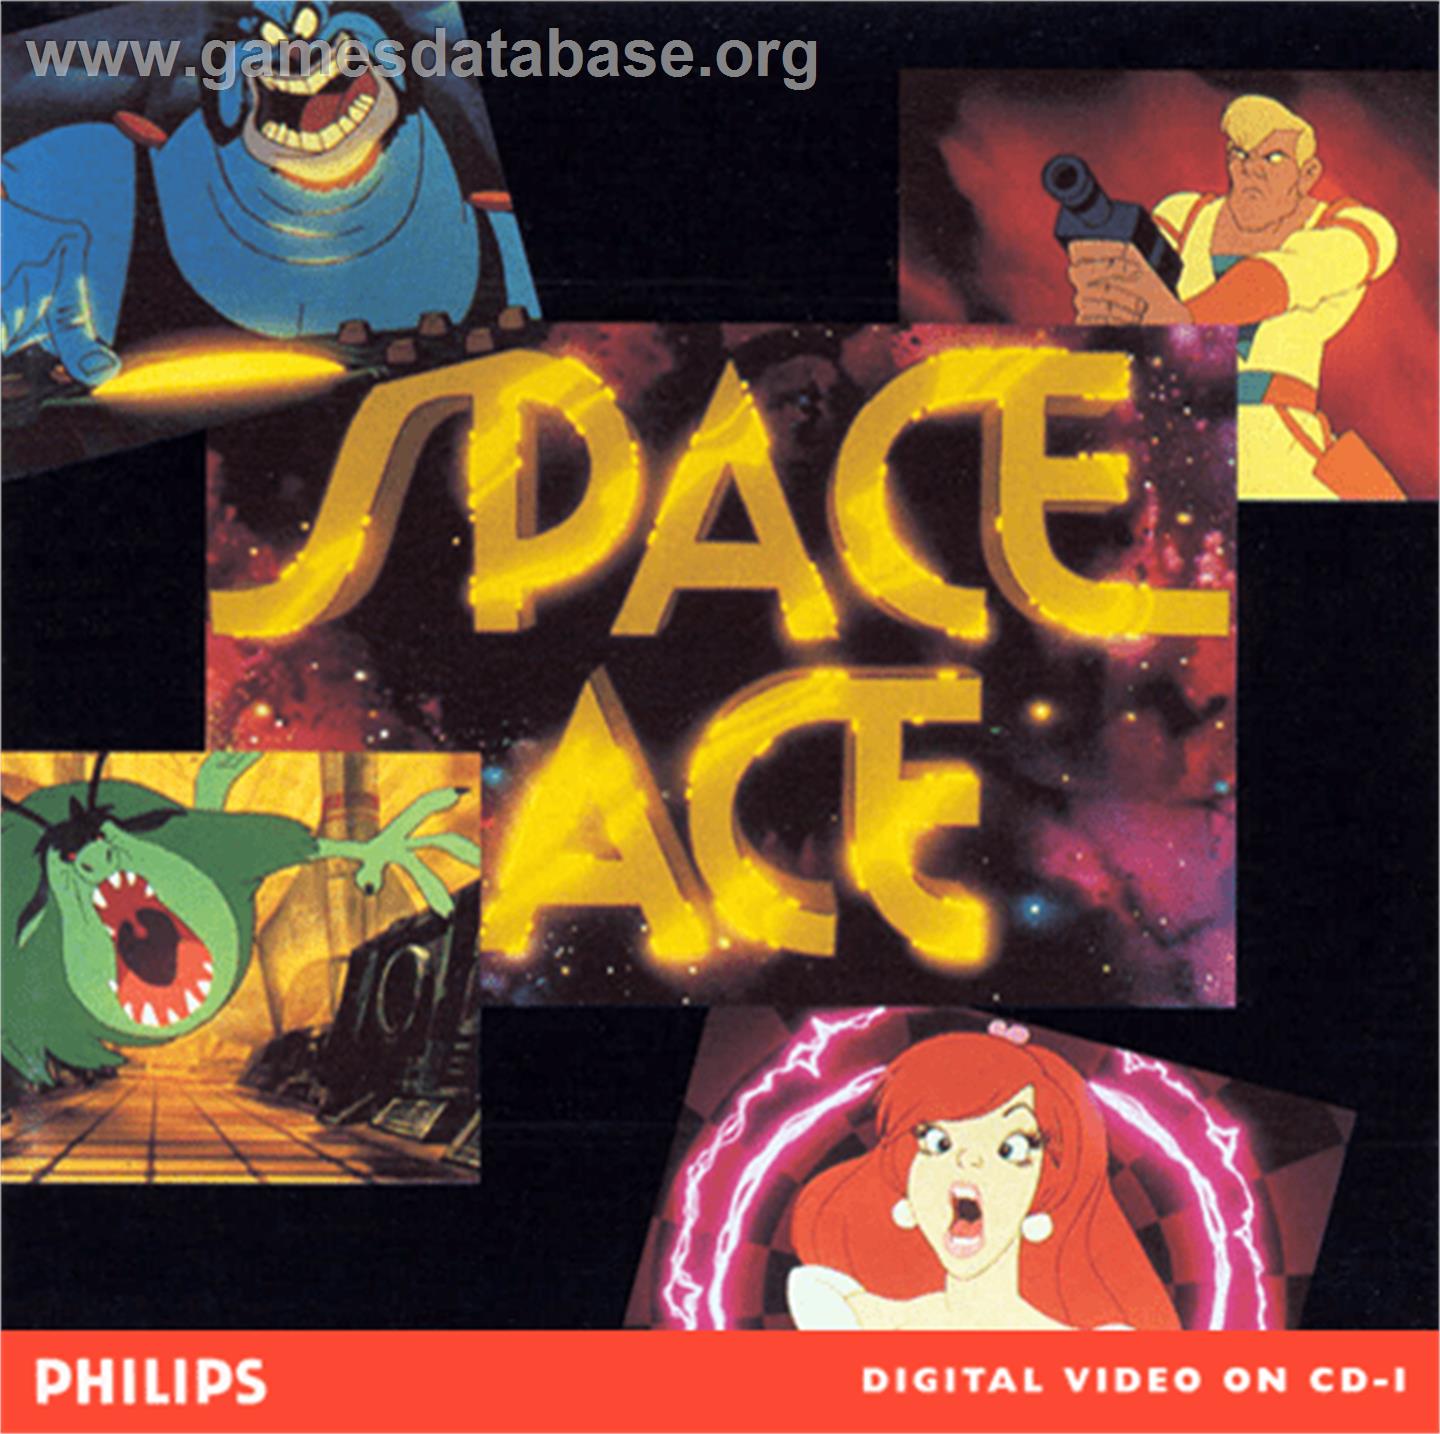 Space Ace - Philips CD-i - Artwork - Box